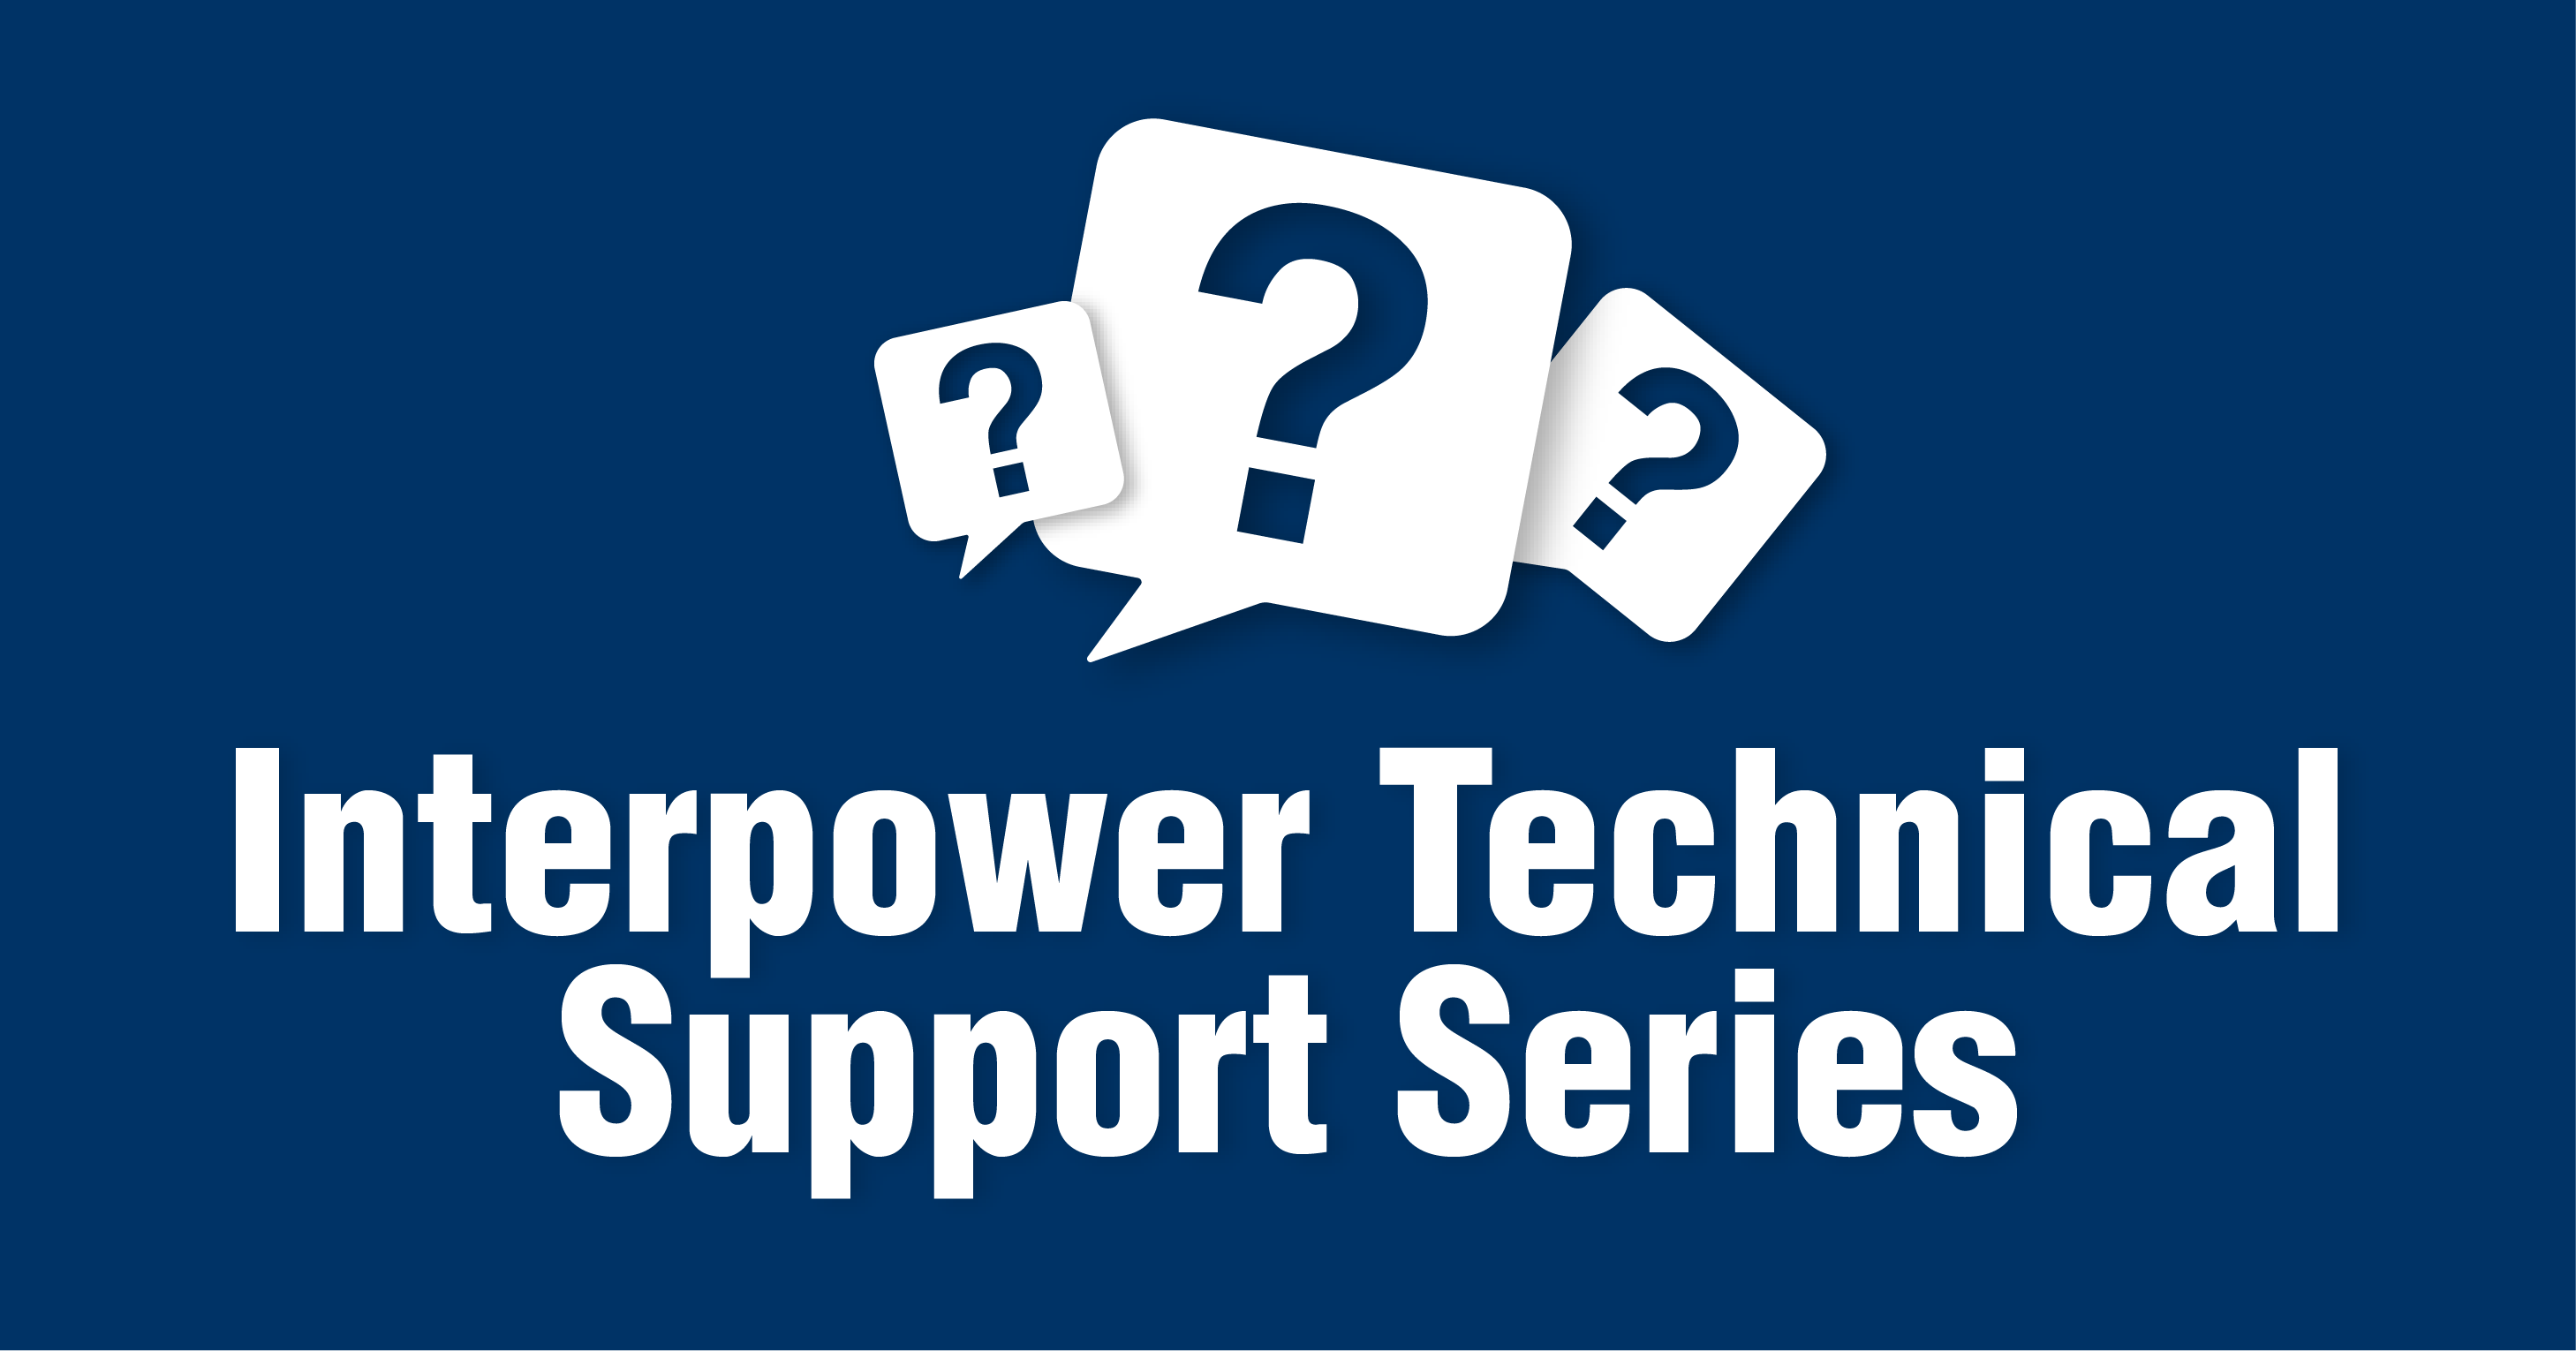 interpower-technical-support-series